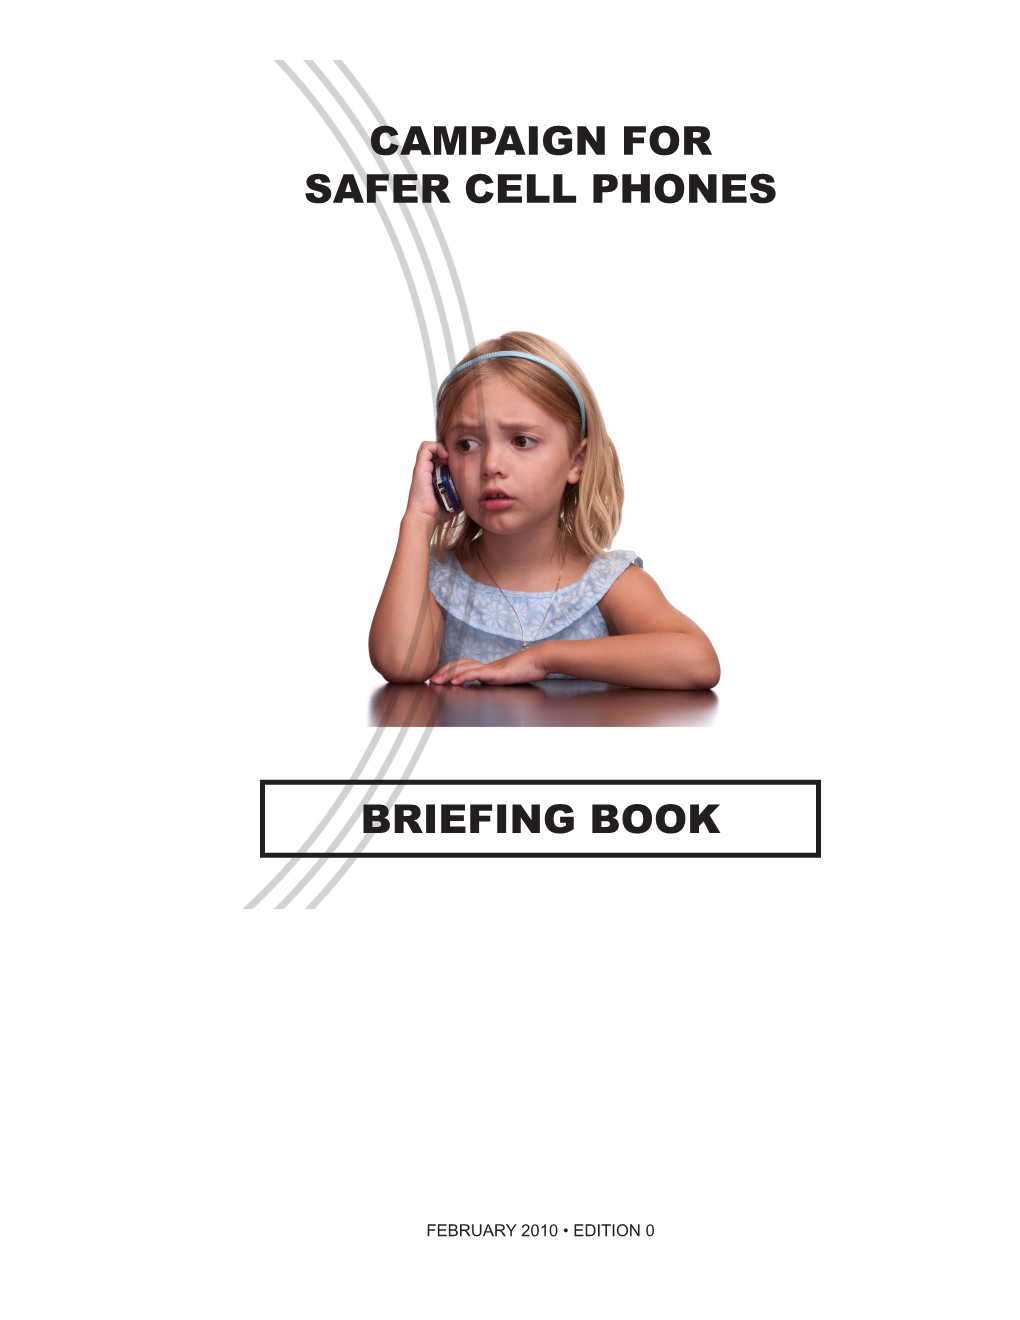 Campaign for Safer Cell Phones Briefing Book